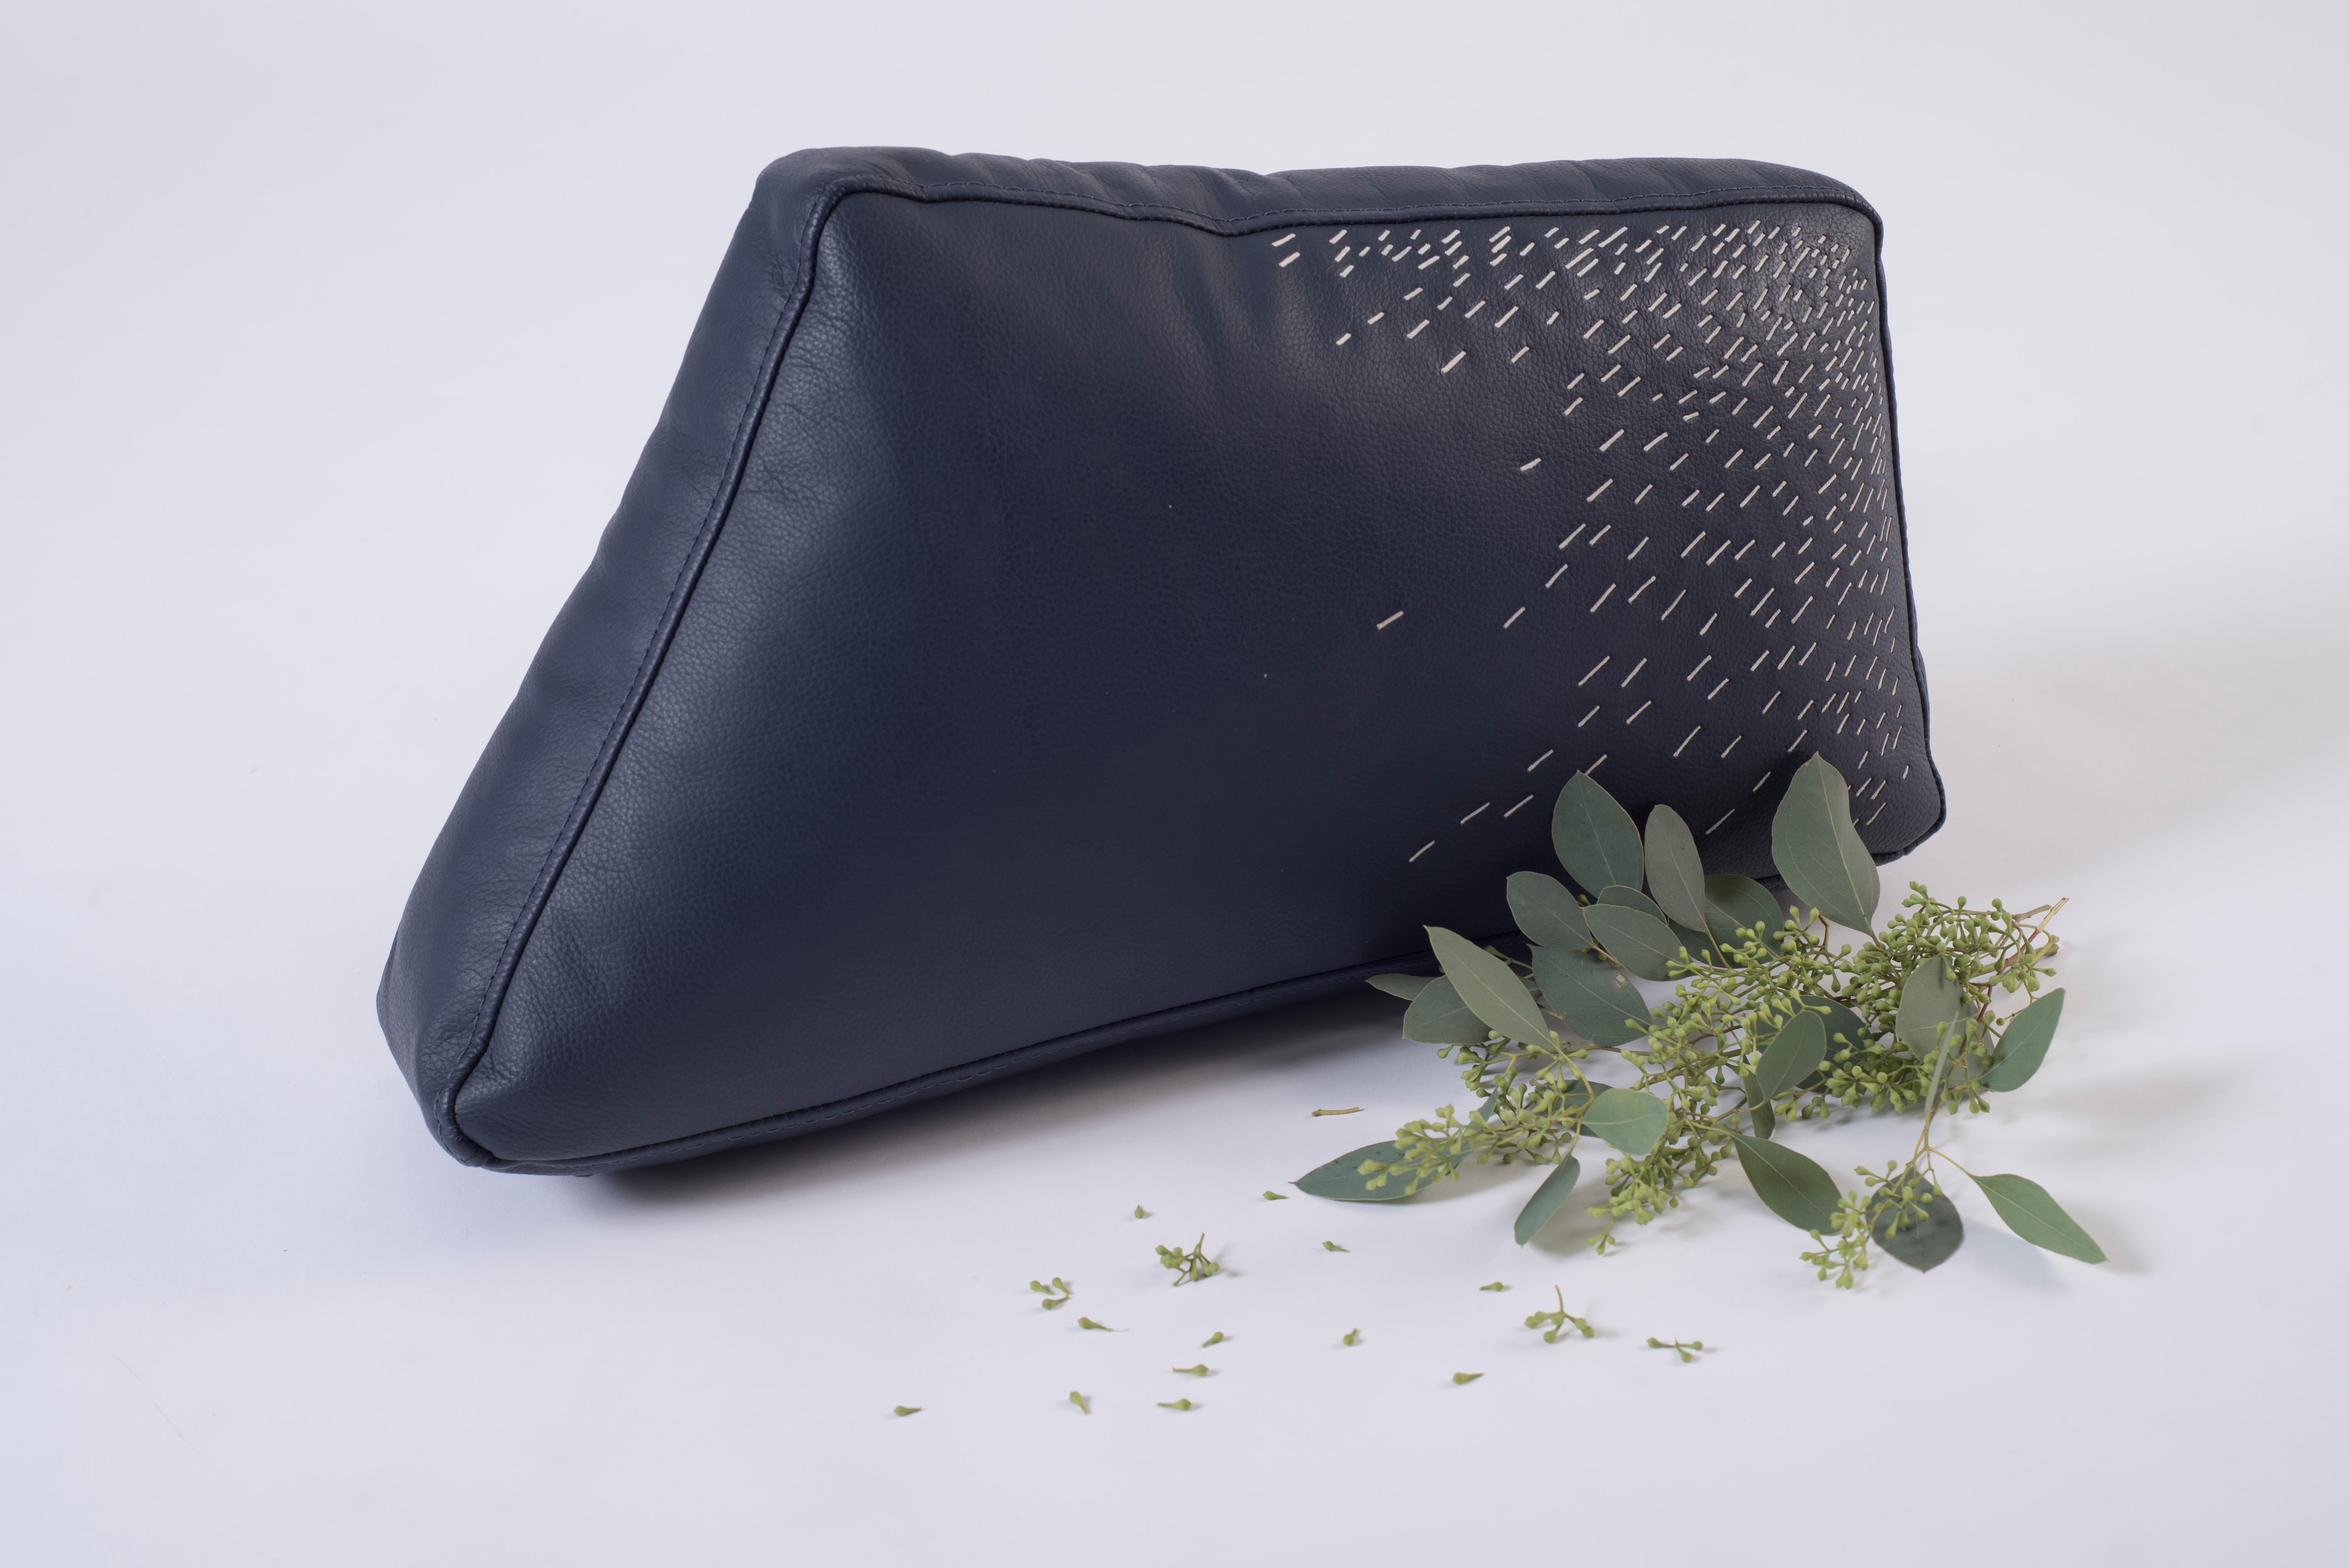 Piteado is the embodiment of Jalisco’s craftsmanship, every stich of the maguey fiber on the tinted leather carries with it centuries of tradition. The Pita cushions reflect the timelessness of the technique, whose delicate embroidery shines through